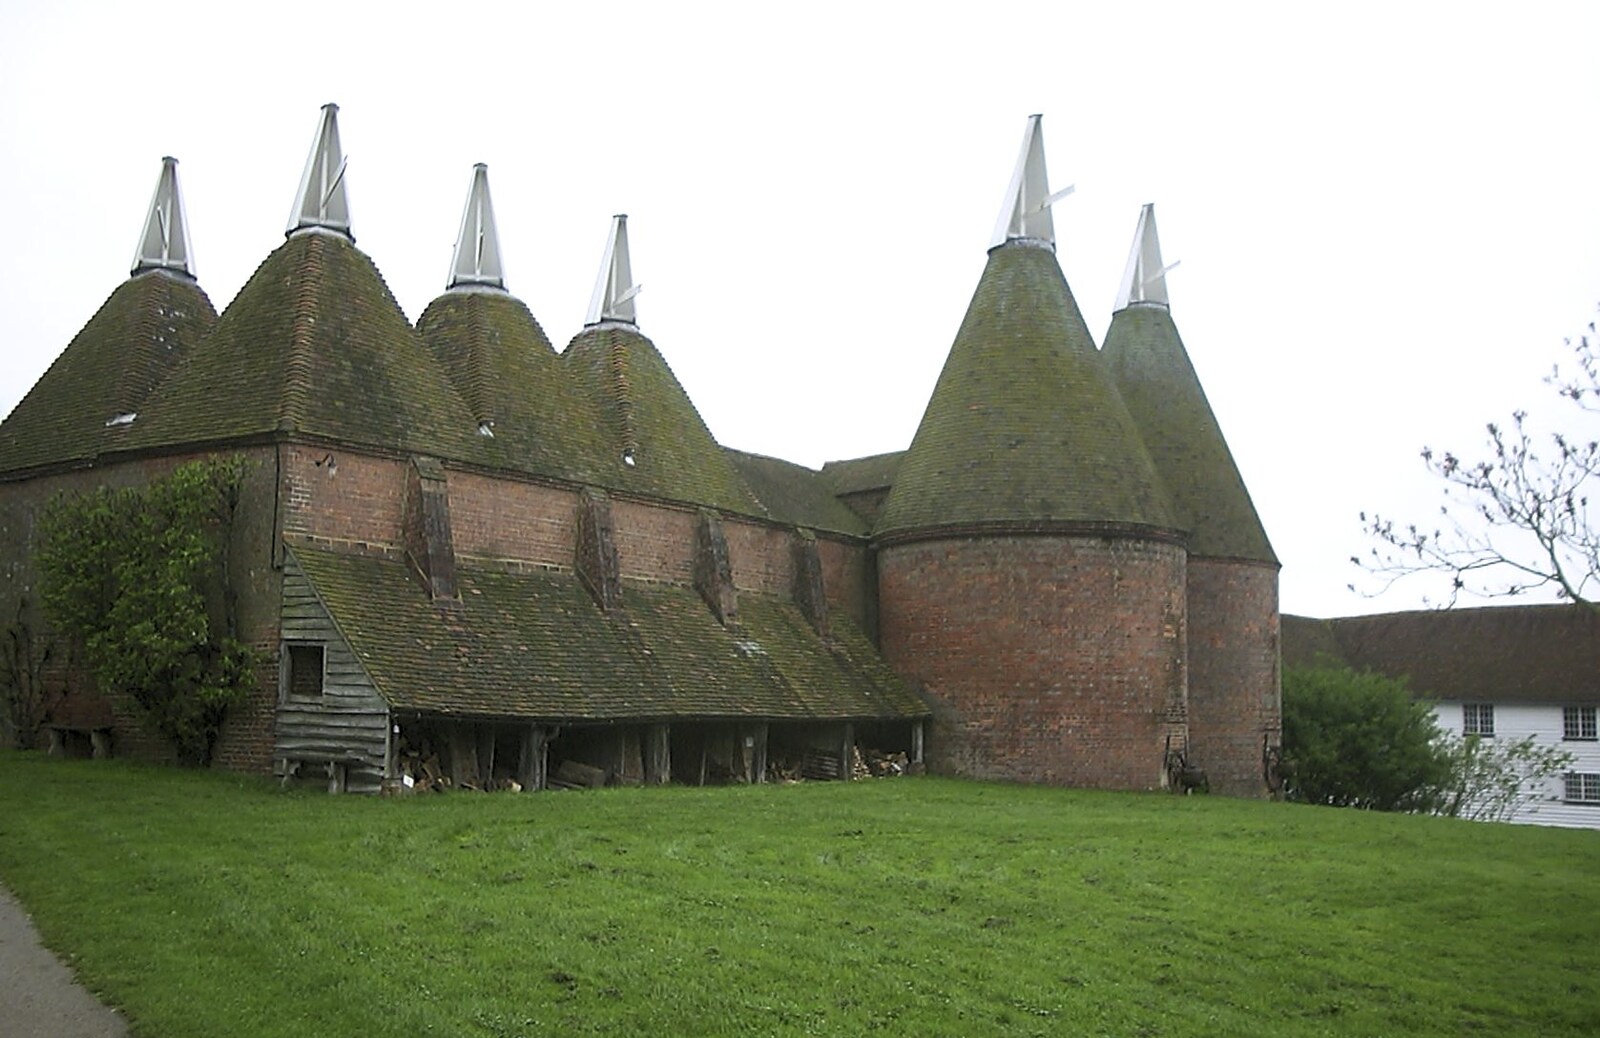 Classic Kentish Oast Houses at Sissinghurst from The BSCC Annual Bike Ride, Lenham, Kent - 8th May 2004